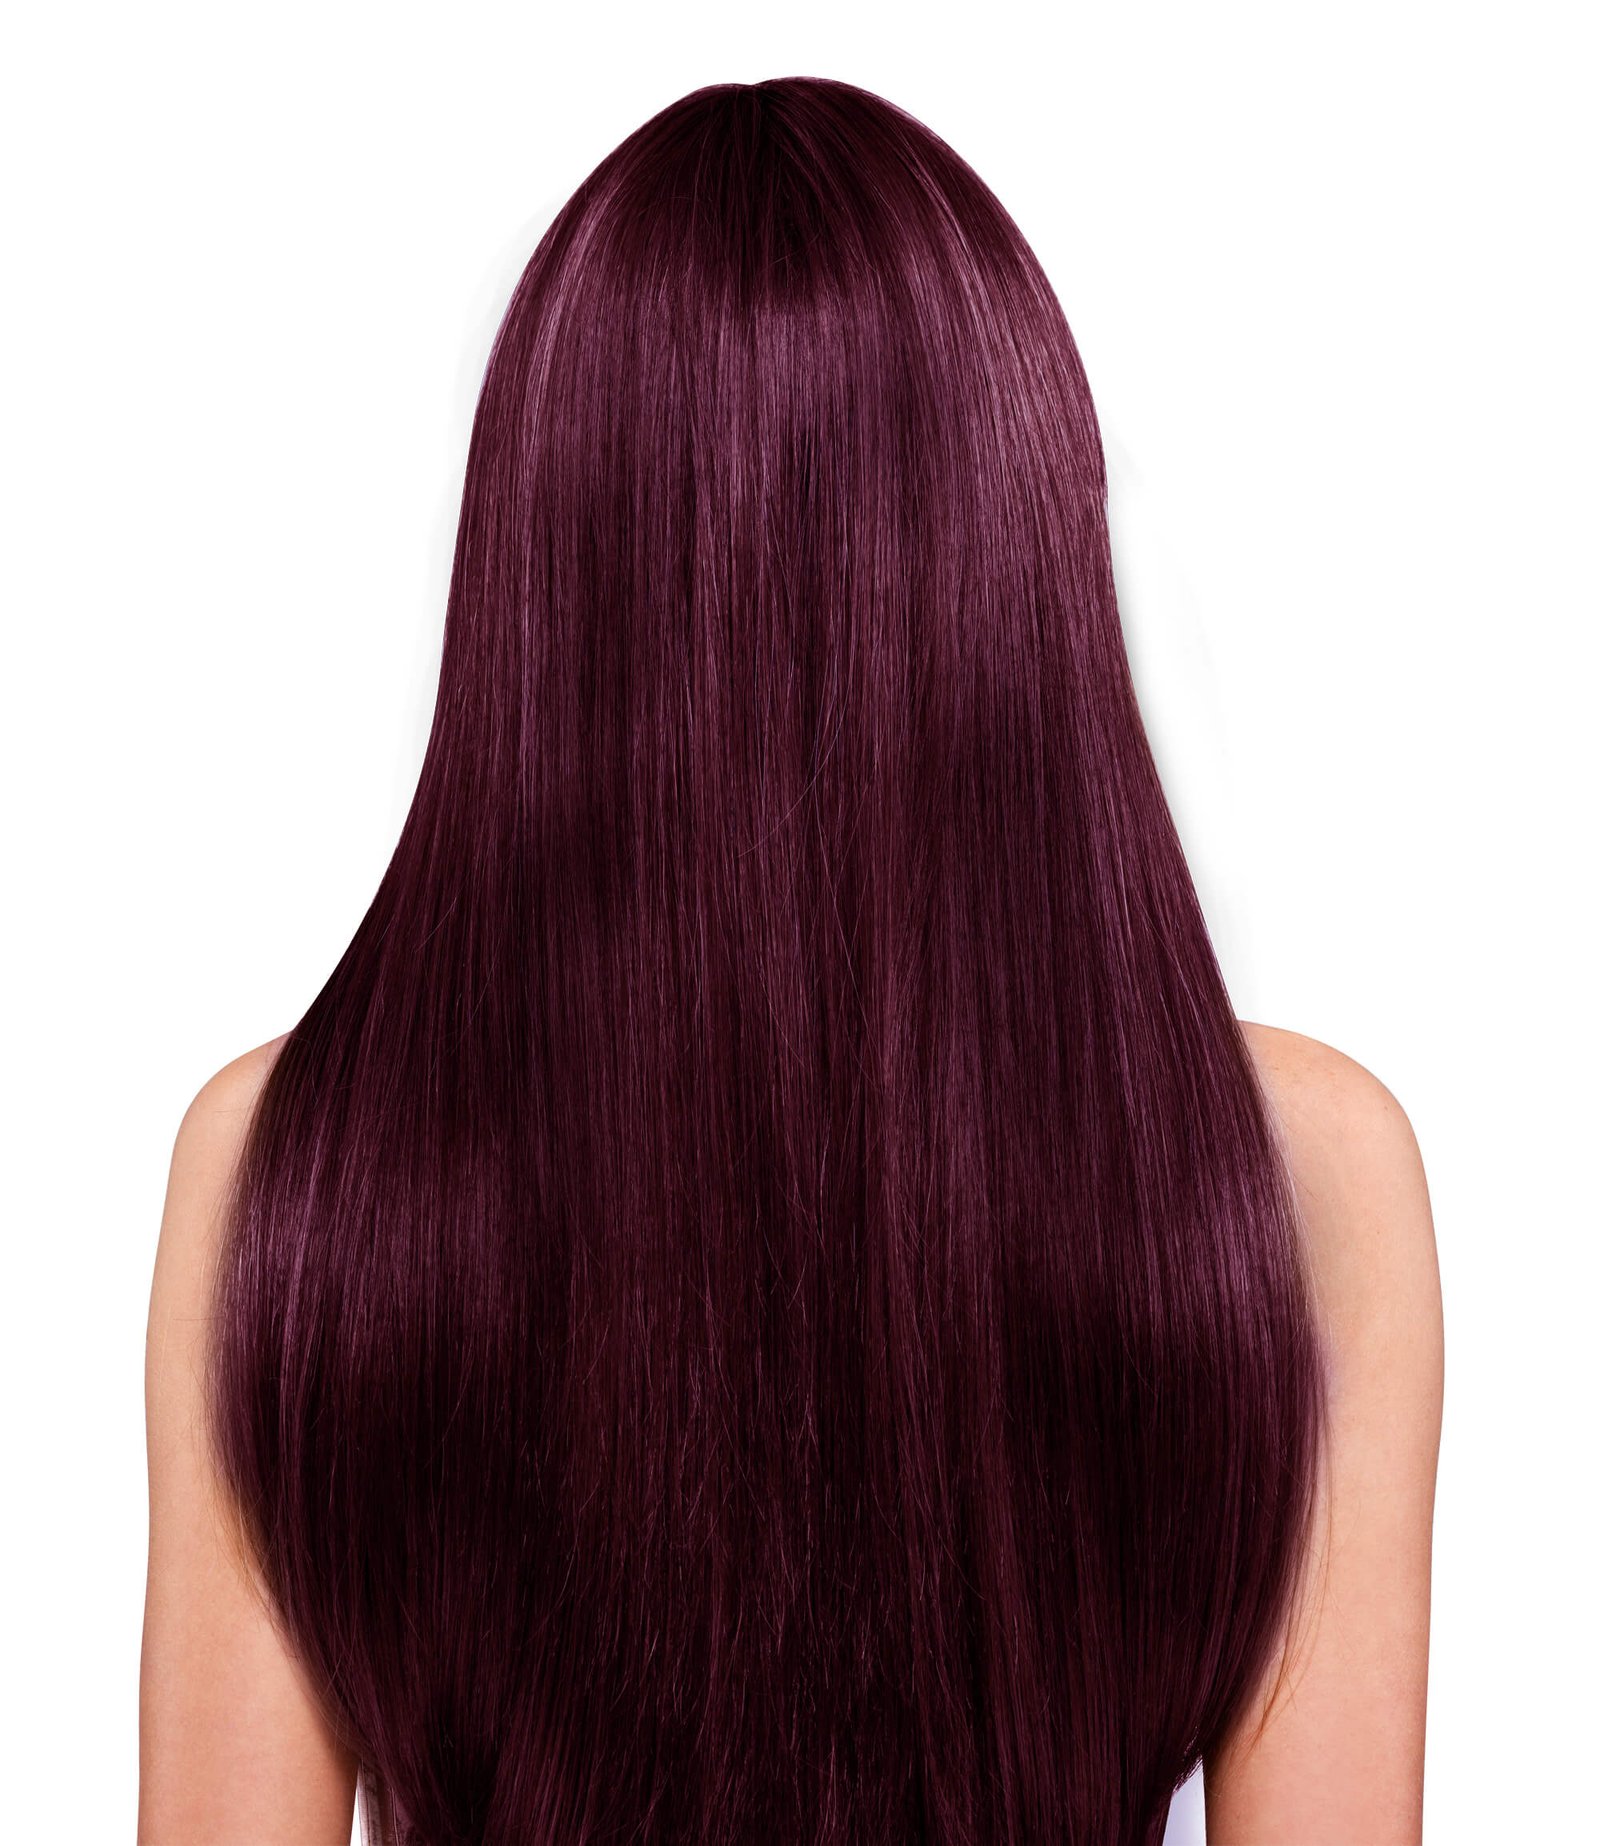 Premium Quality Mahogany Hair Color from Manufacturer and Supplier from  India